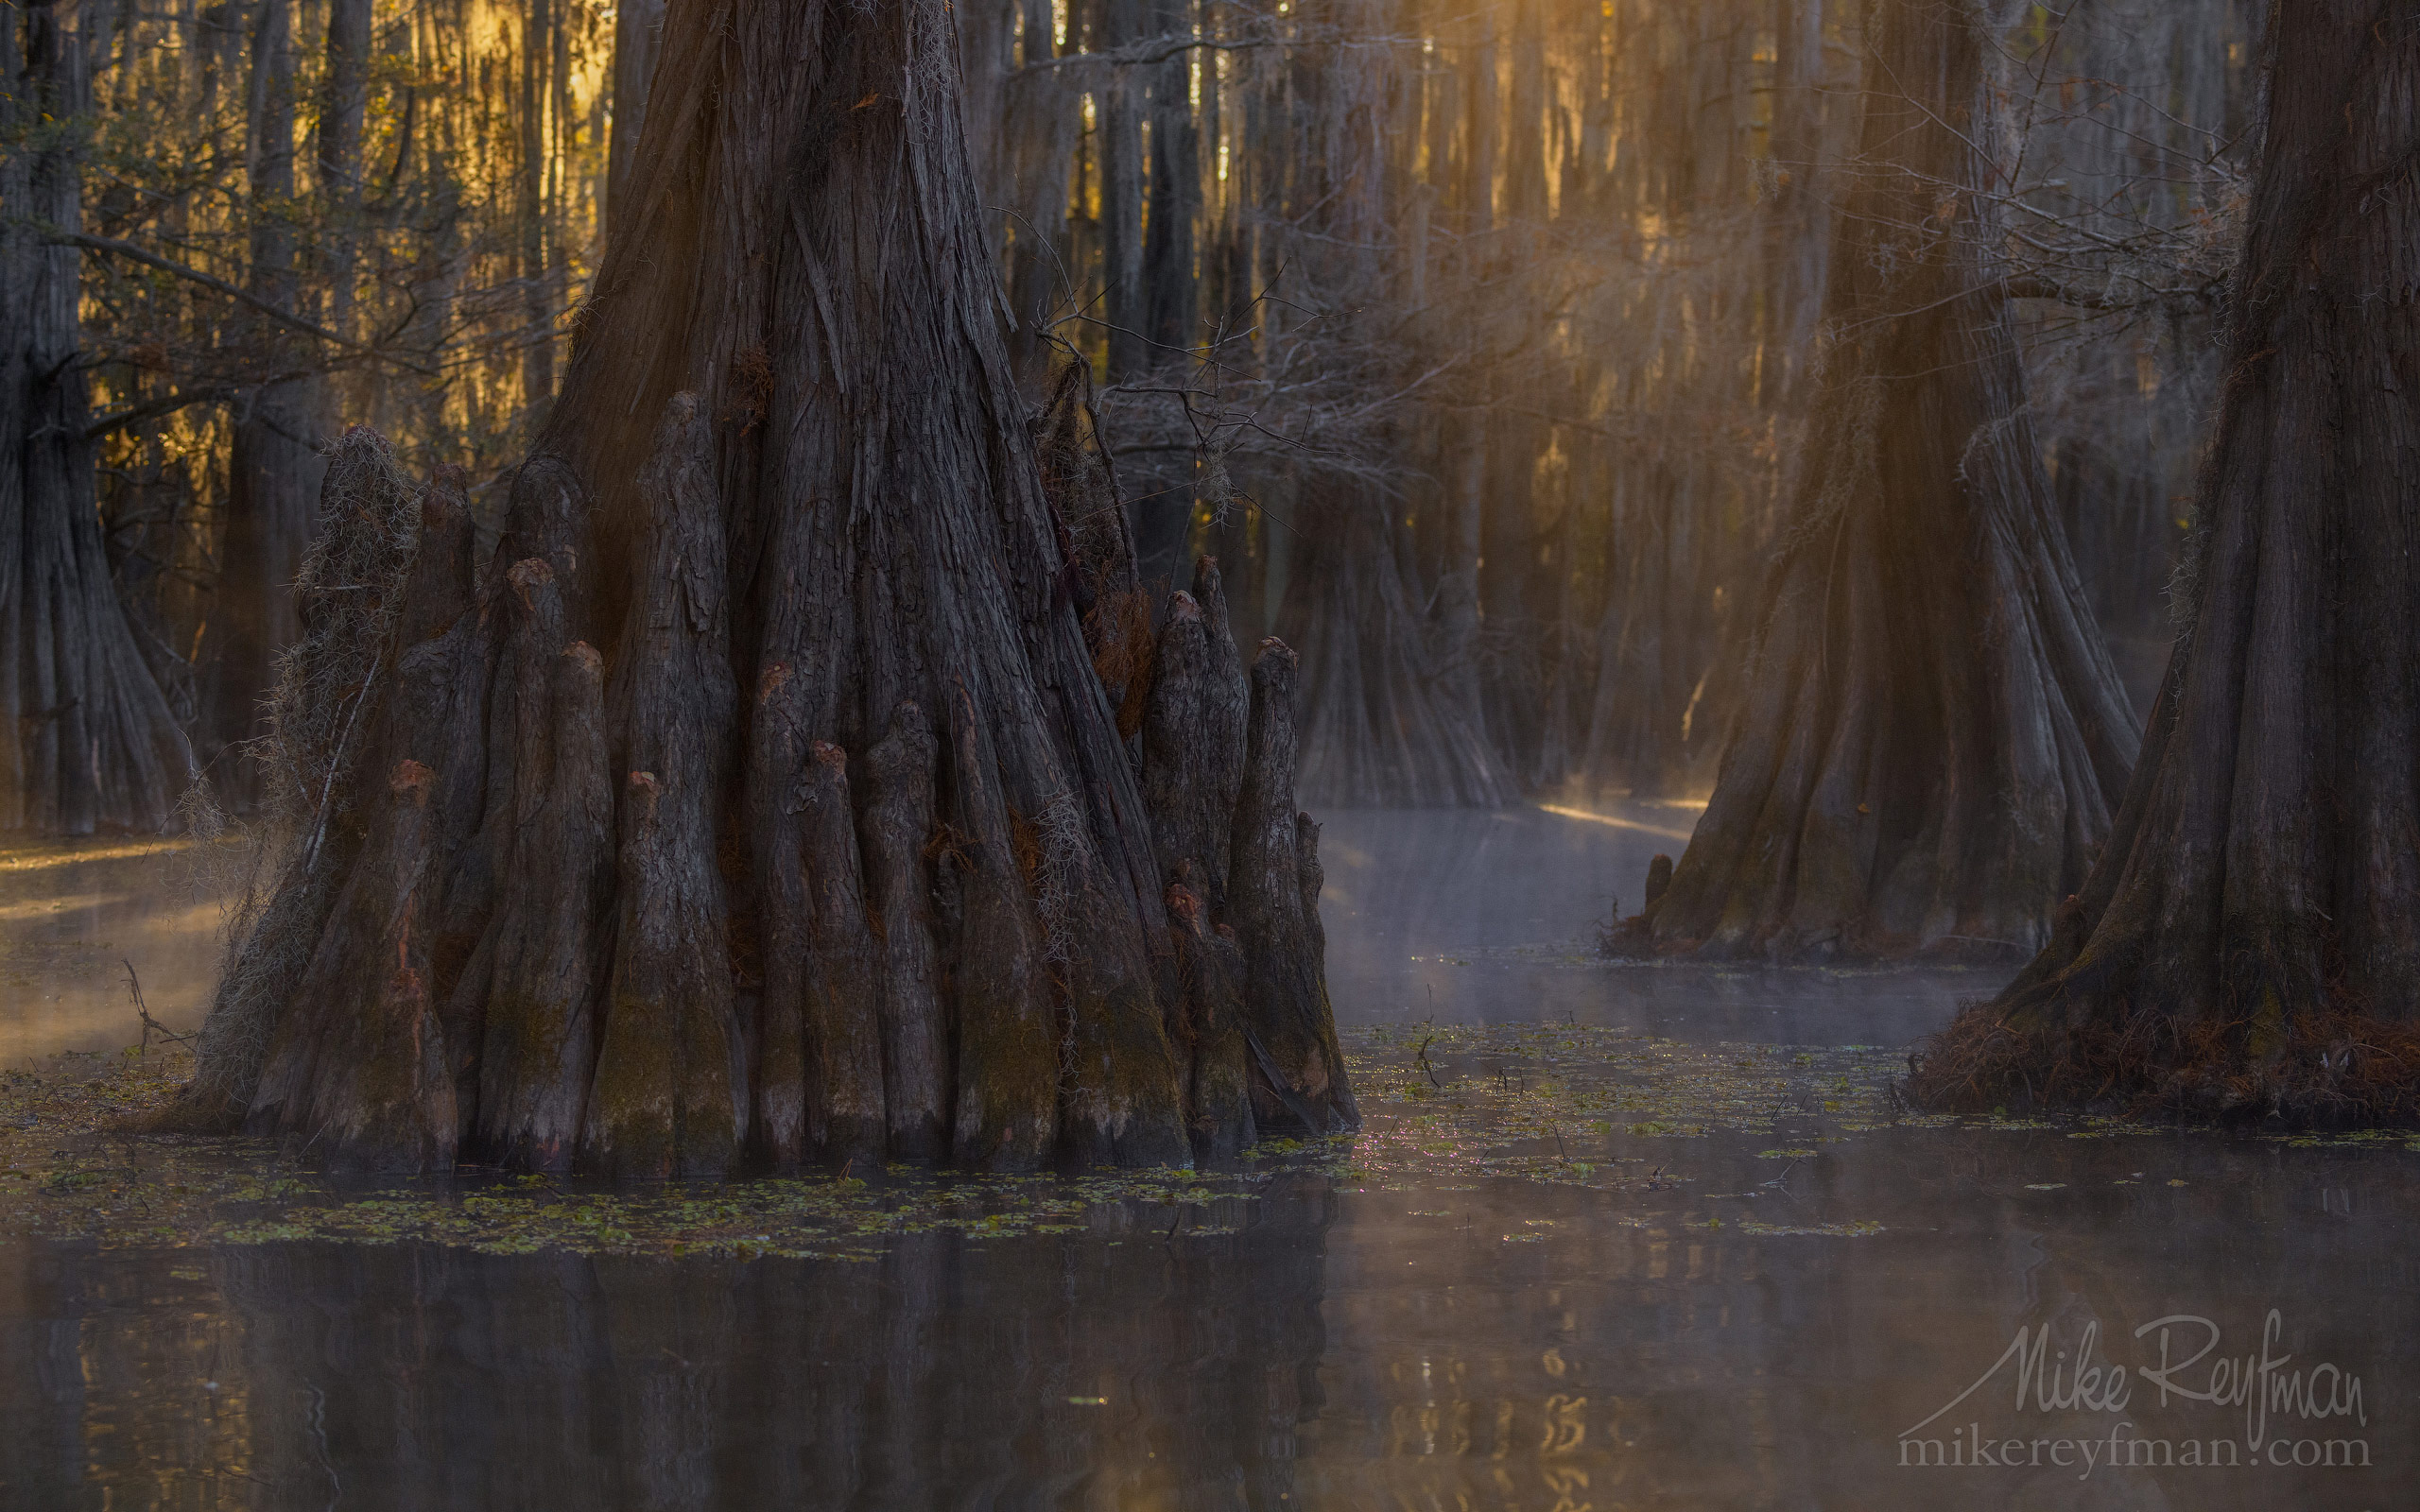 Bald Cypress trees in the swamp. Foggy morning on Caddo Lake, Texas ...